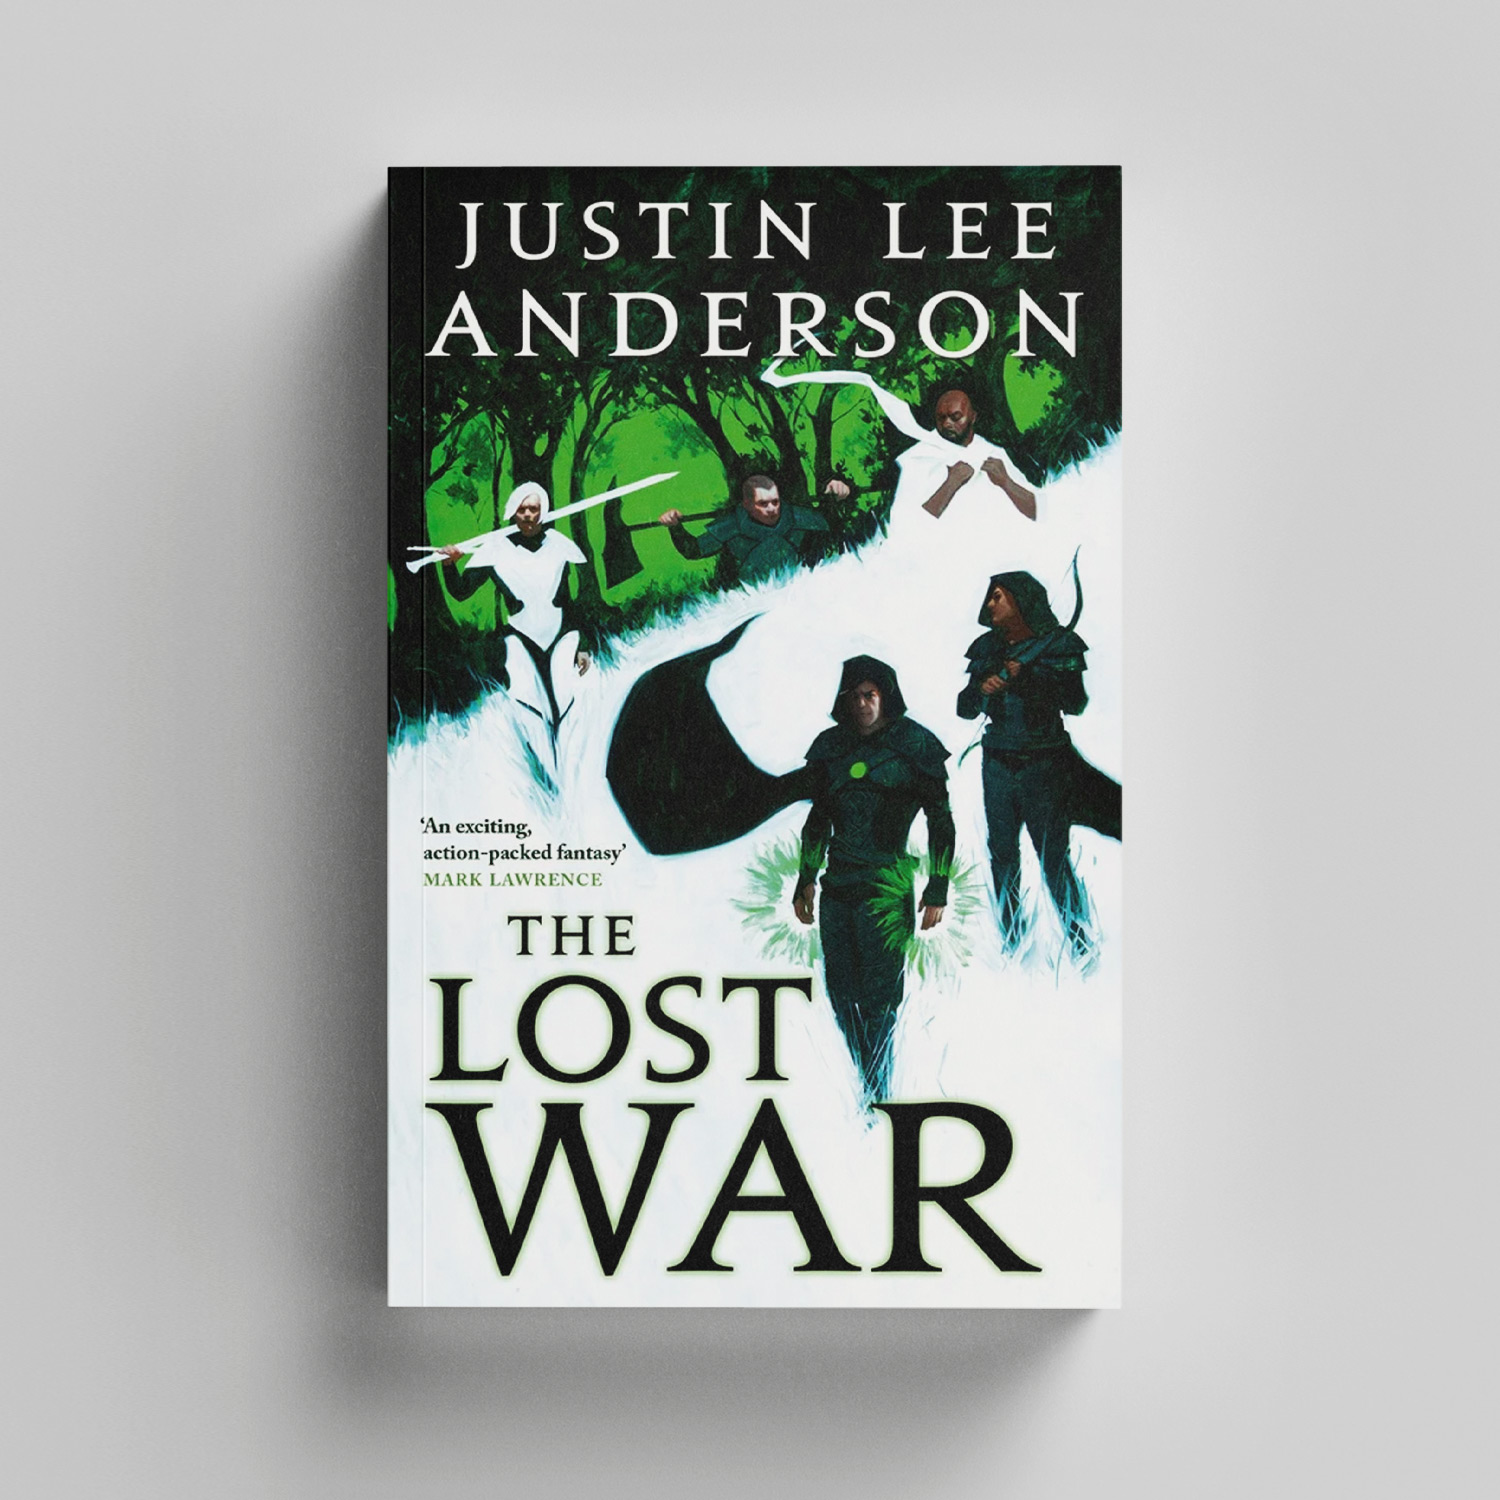 The Lost War by Justin Lee Anderson